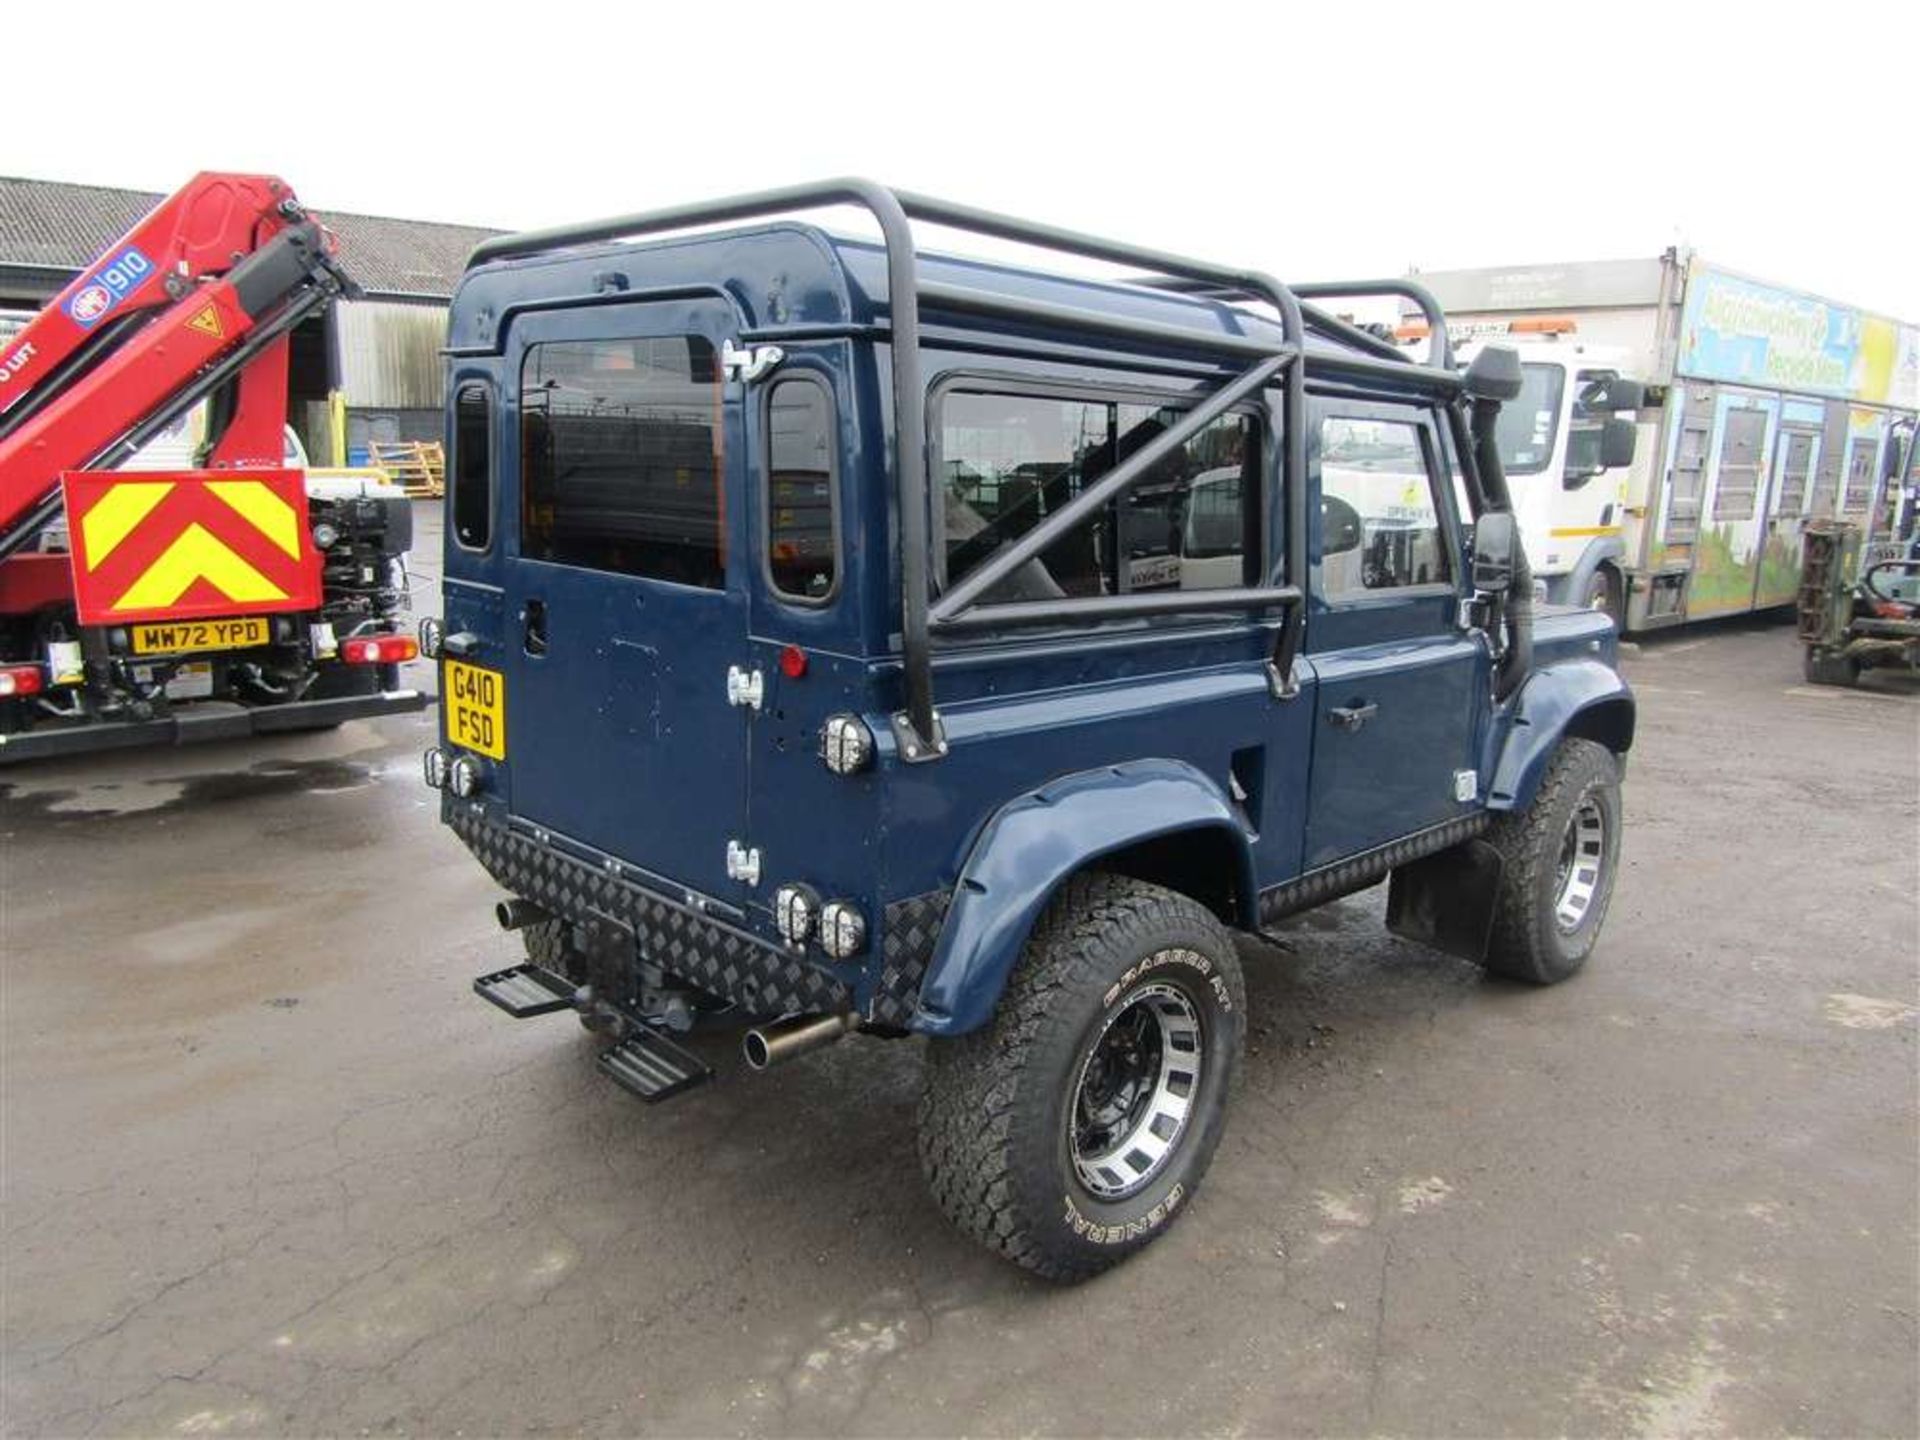 1990 G reg Land Rover 90 4C SW DT - SEE ADDITIONAL INFO FOR A LIST OF EXTRAS ON THIS VEHICLE !!! - Image 4 of 6